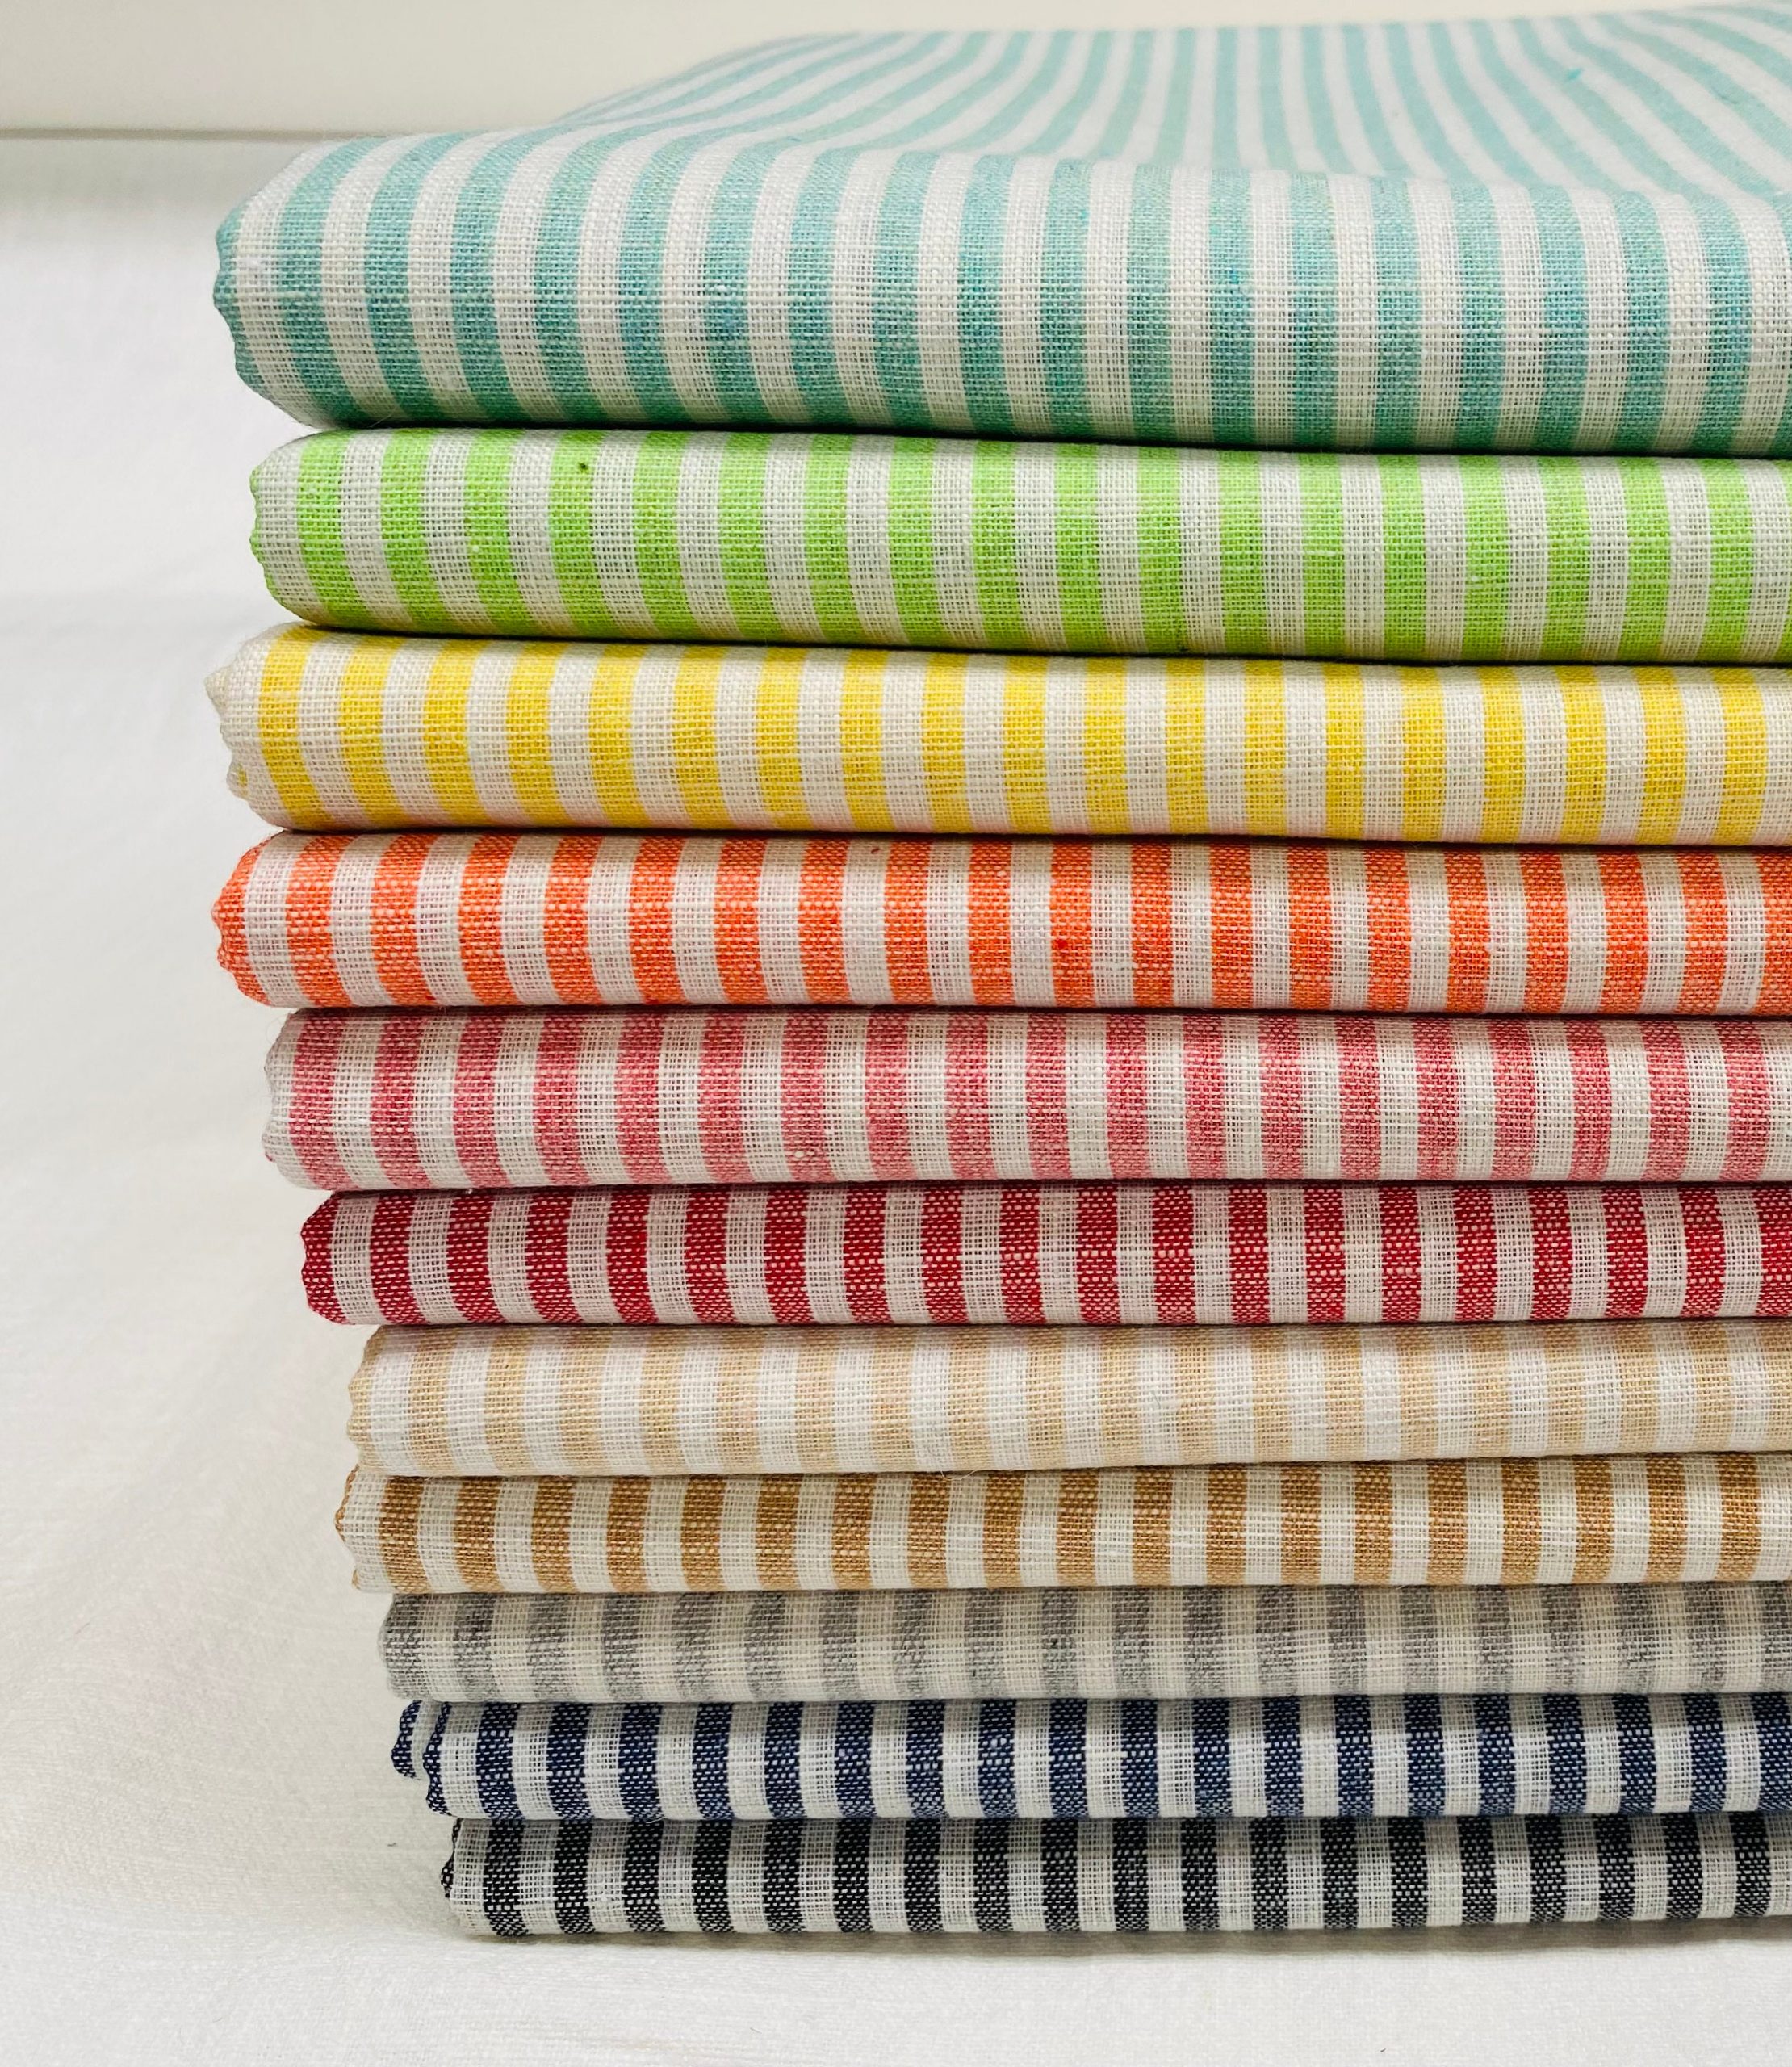 https://lushfabric.com/wp-content/uploads/2021/11/candy-stripe-linen-fabric-light-cotton-material-cute-striped-white-lines-home-decor-dressmaking-59-or-150cm-wide-618bce27-scaled.jpg